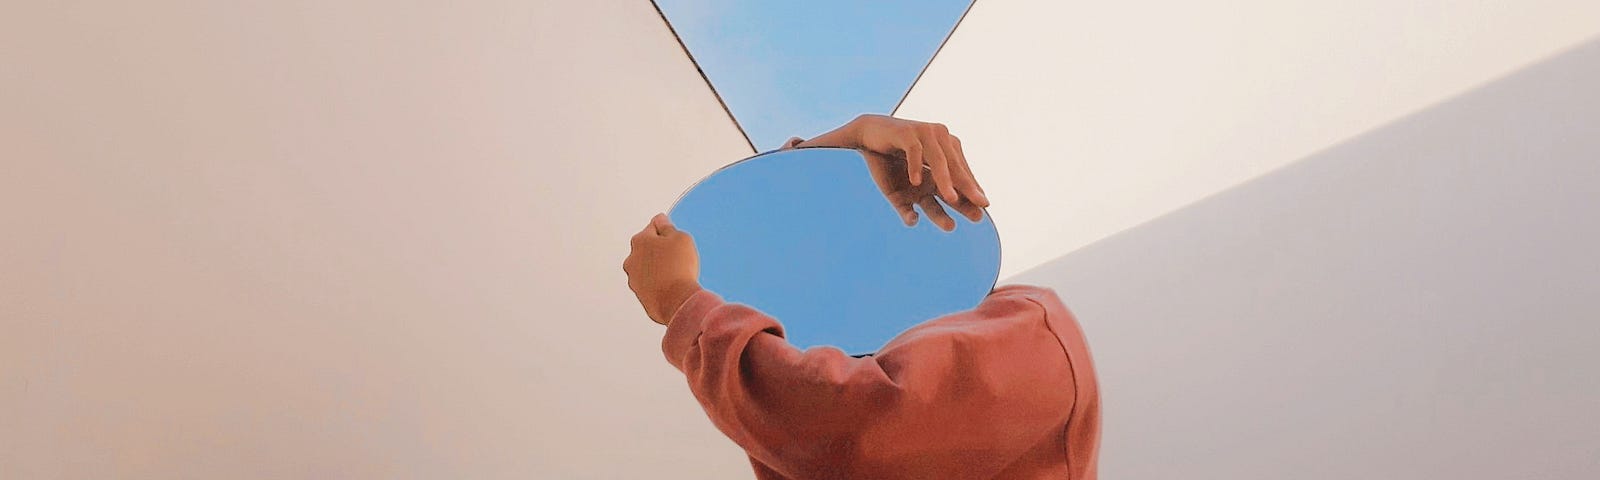 A photo of a person holding a mirror that reflects the blue sky. The mirror is covering their face.